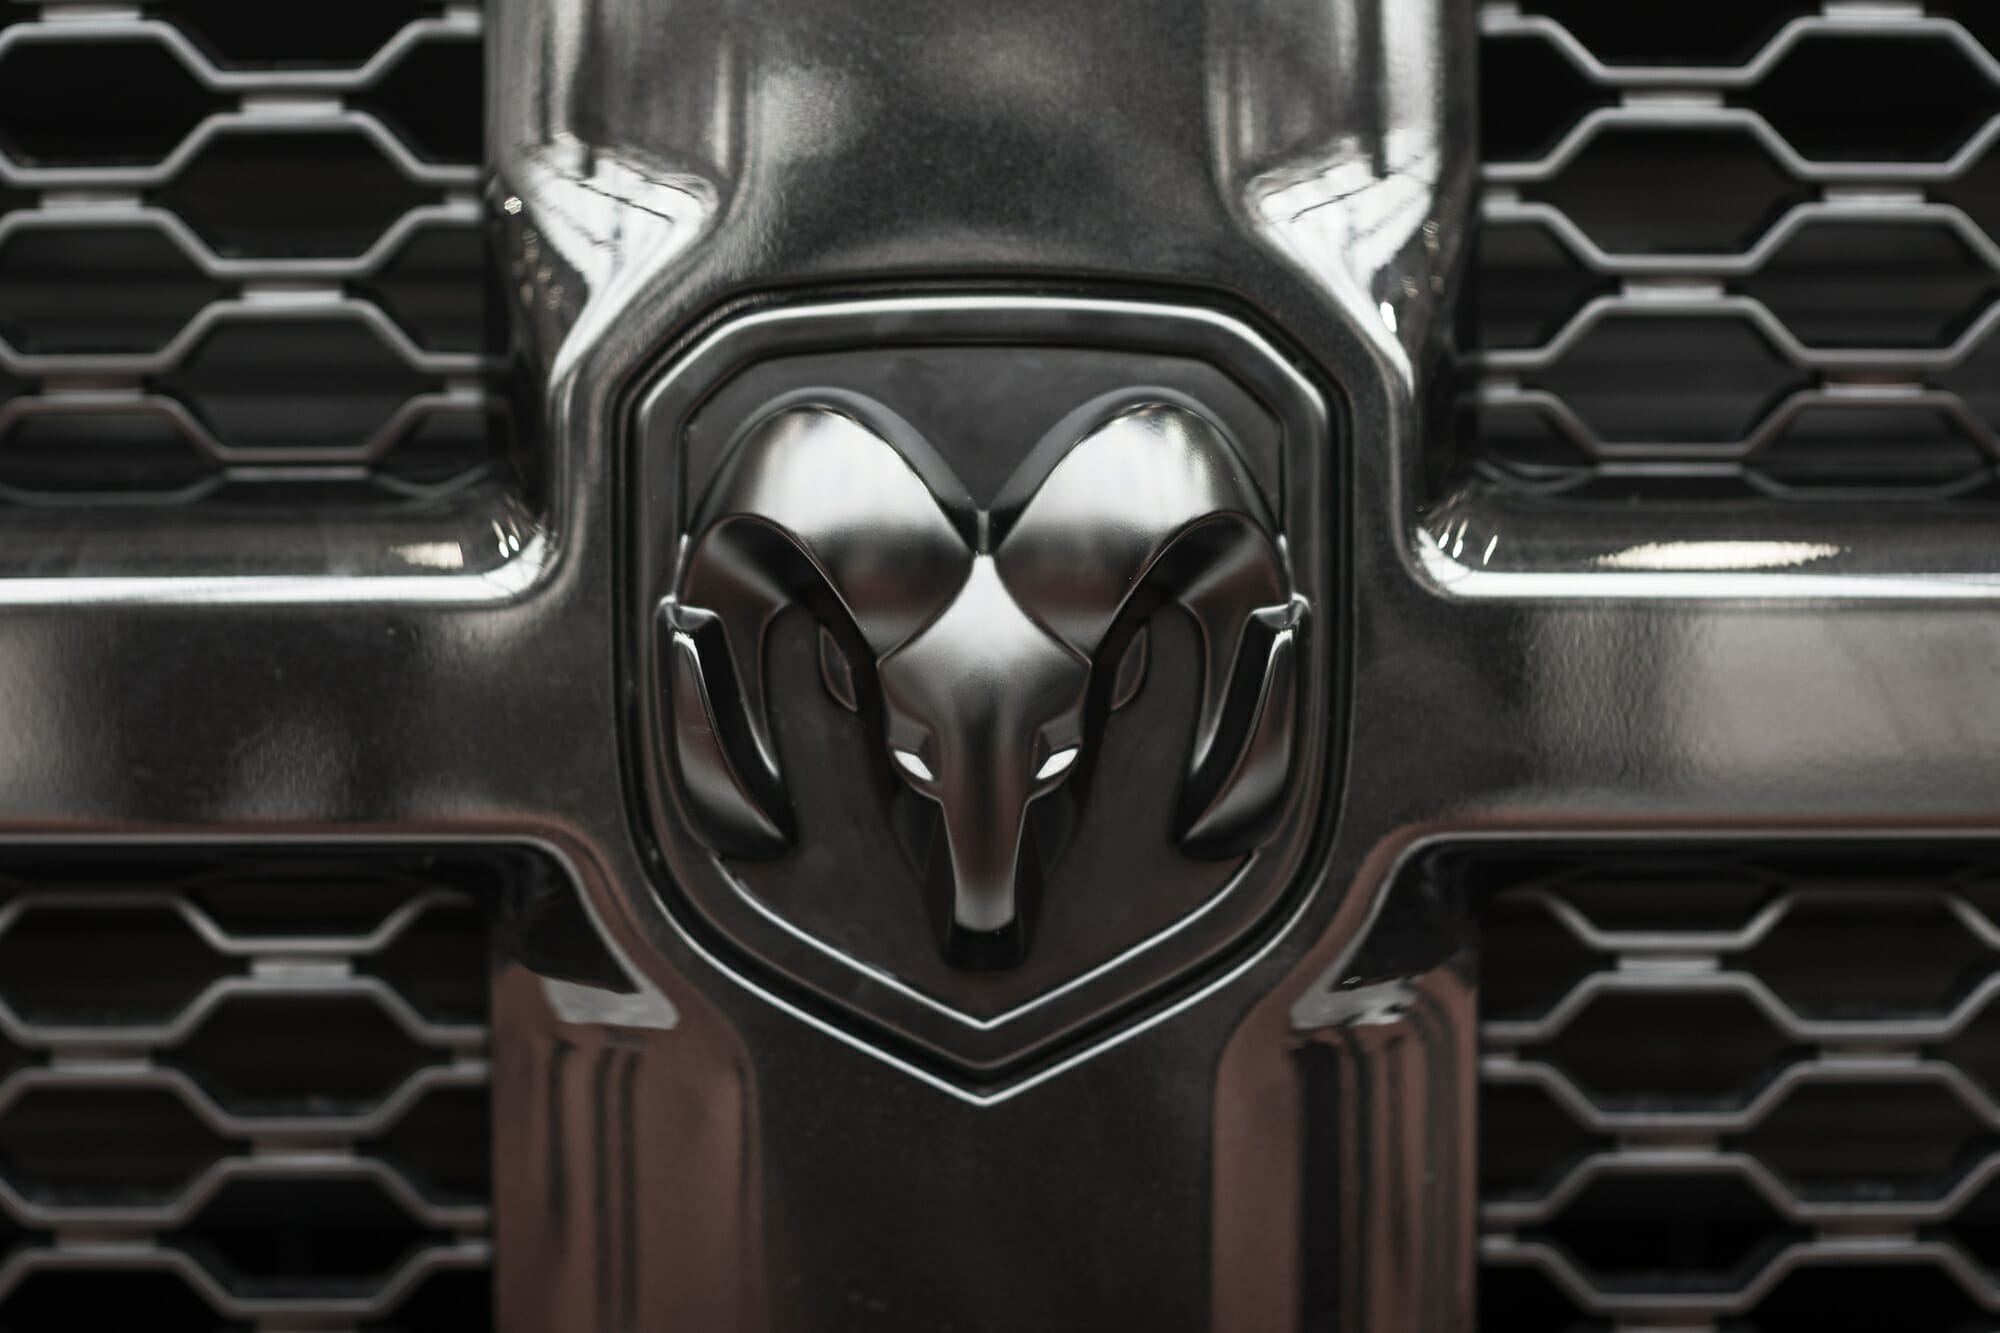 Ram logo on front grille of dodge truck 